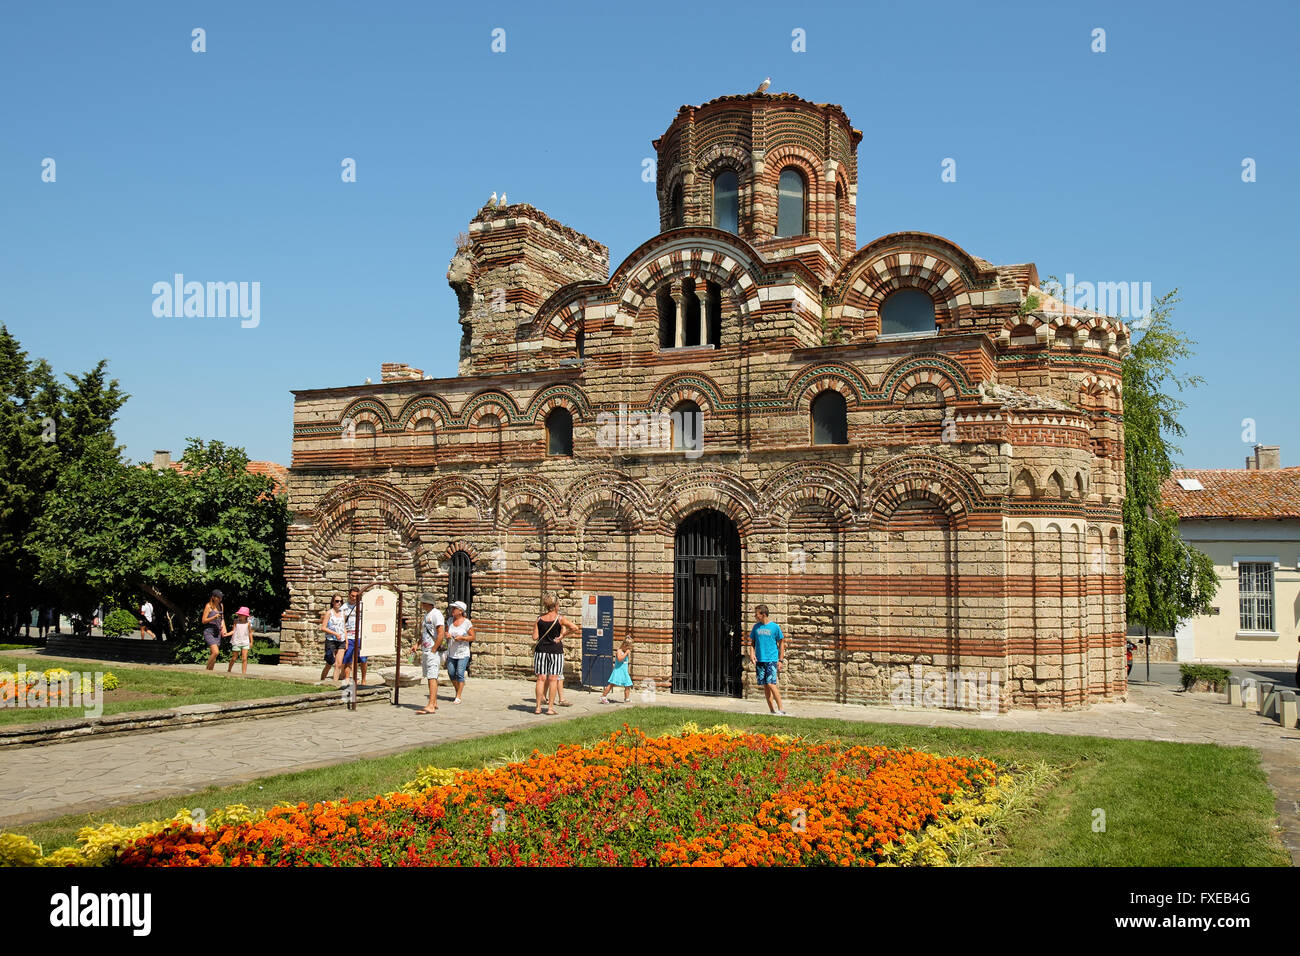 NESSEBAR, BULGARIA - JULY 18, 2015: The Church of Christ Pantocrator in old town of Nessebar, Bulgaria Stock Photo